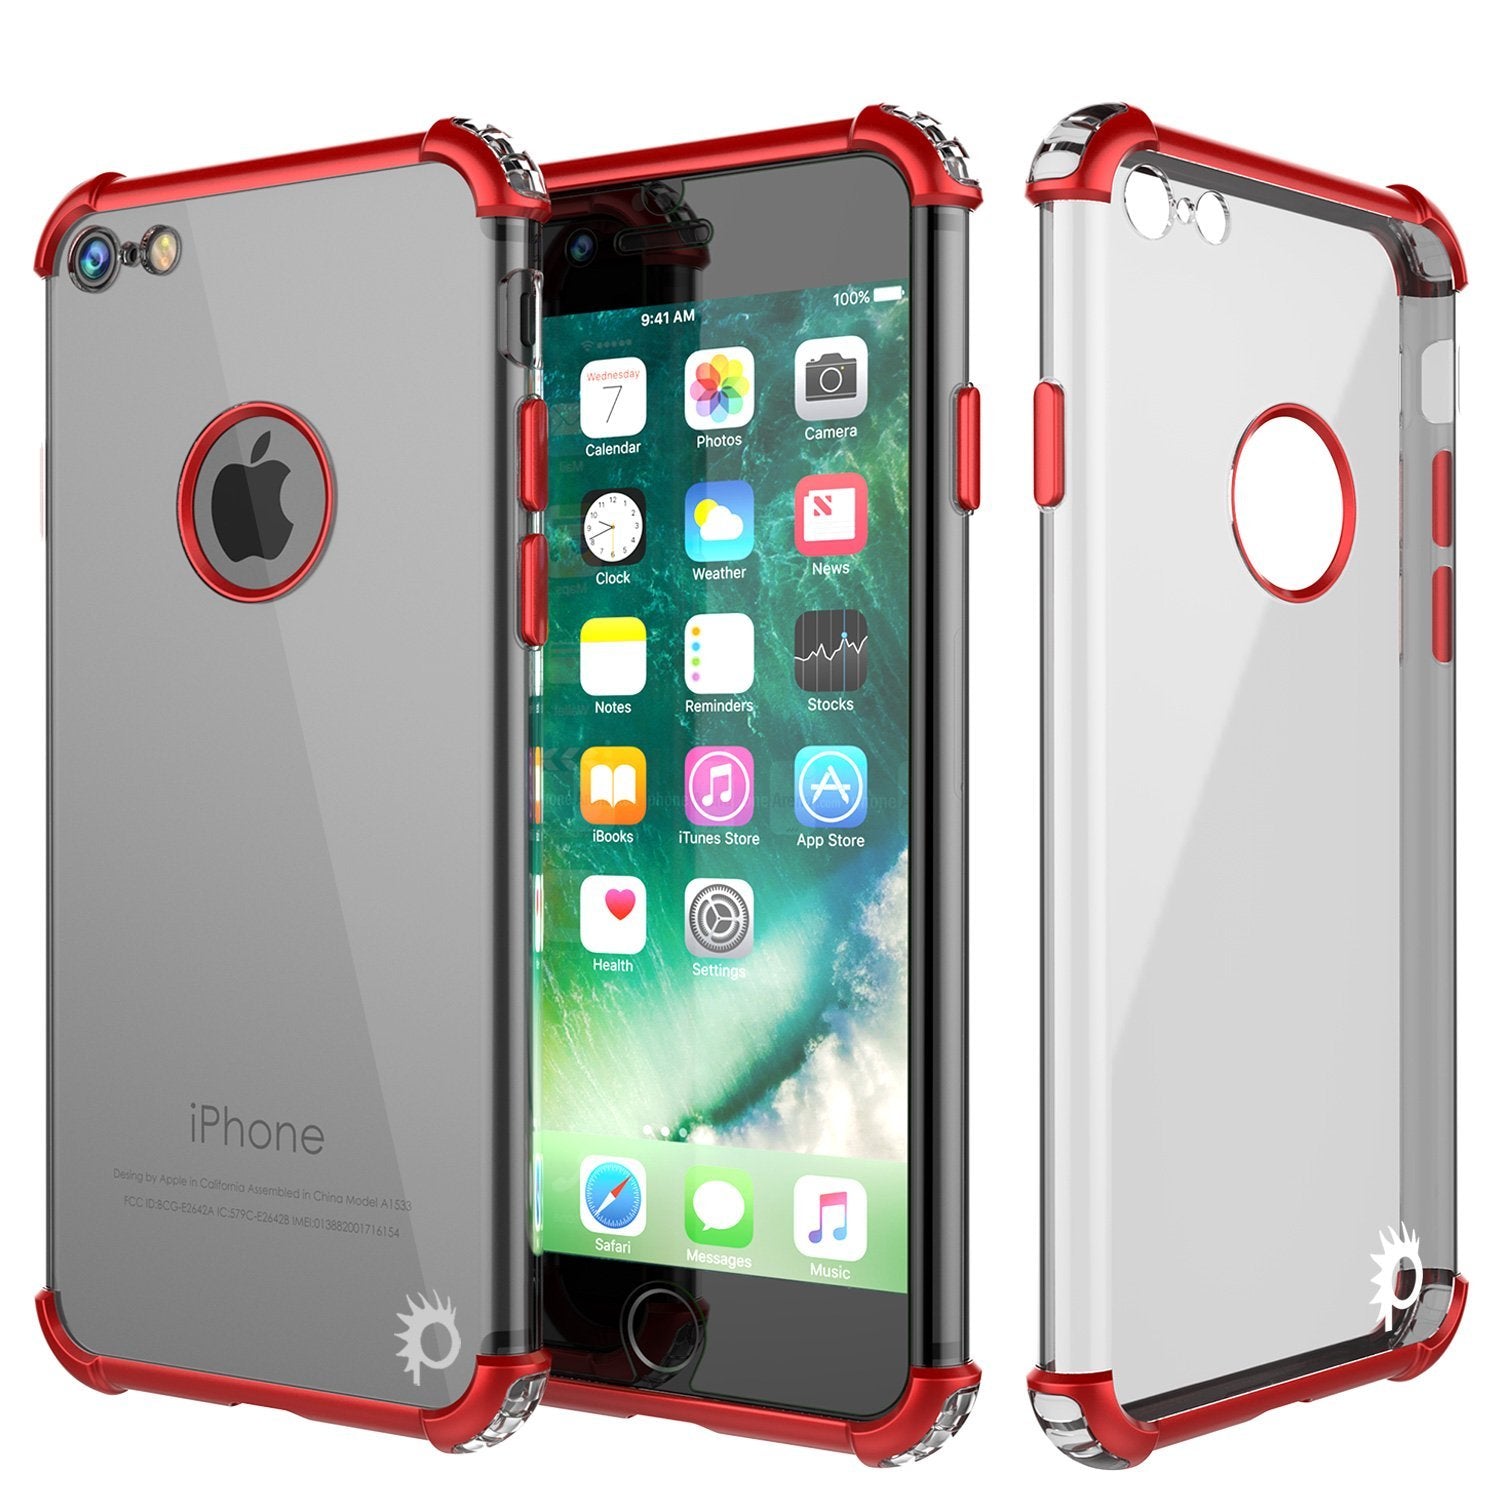 iPhone SE (4.7") Case, Punkcase [BLAZE SERIES] Protective Cover W/ PunkShield Screen Protector [Shockproof] [Slim Fit] for Apple iPhone [Red] 